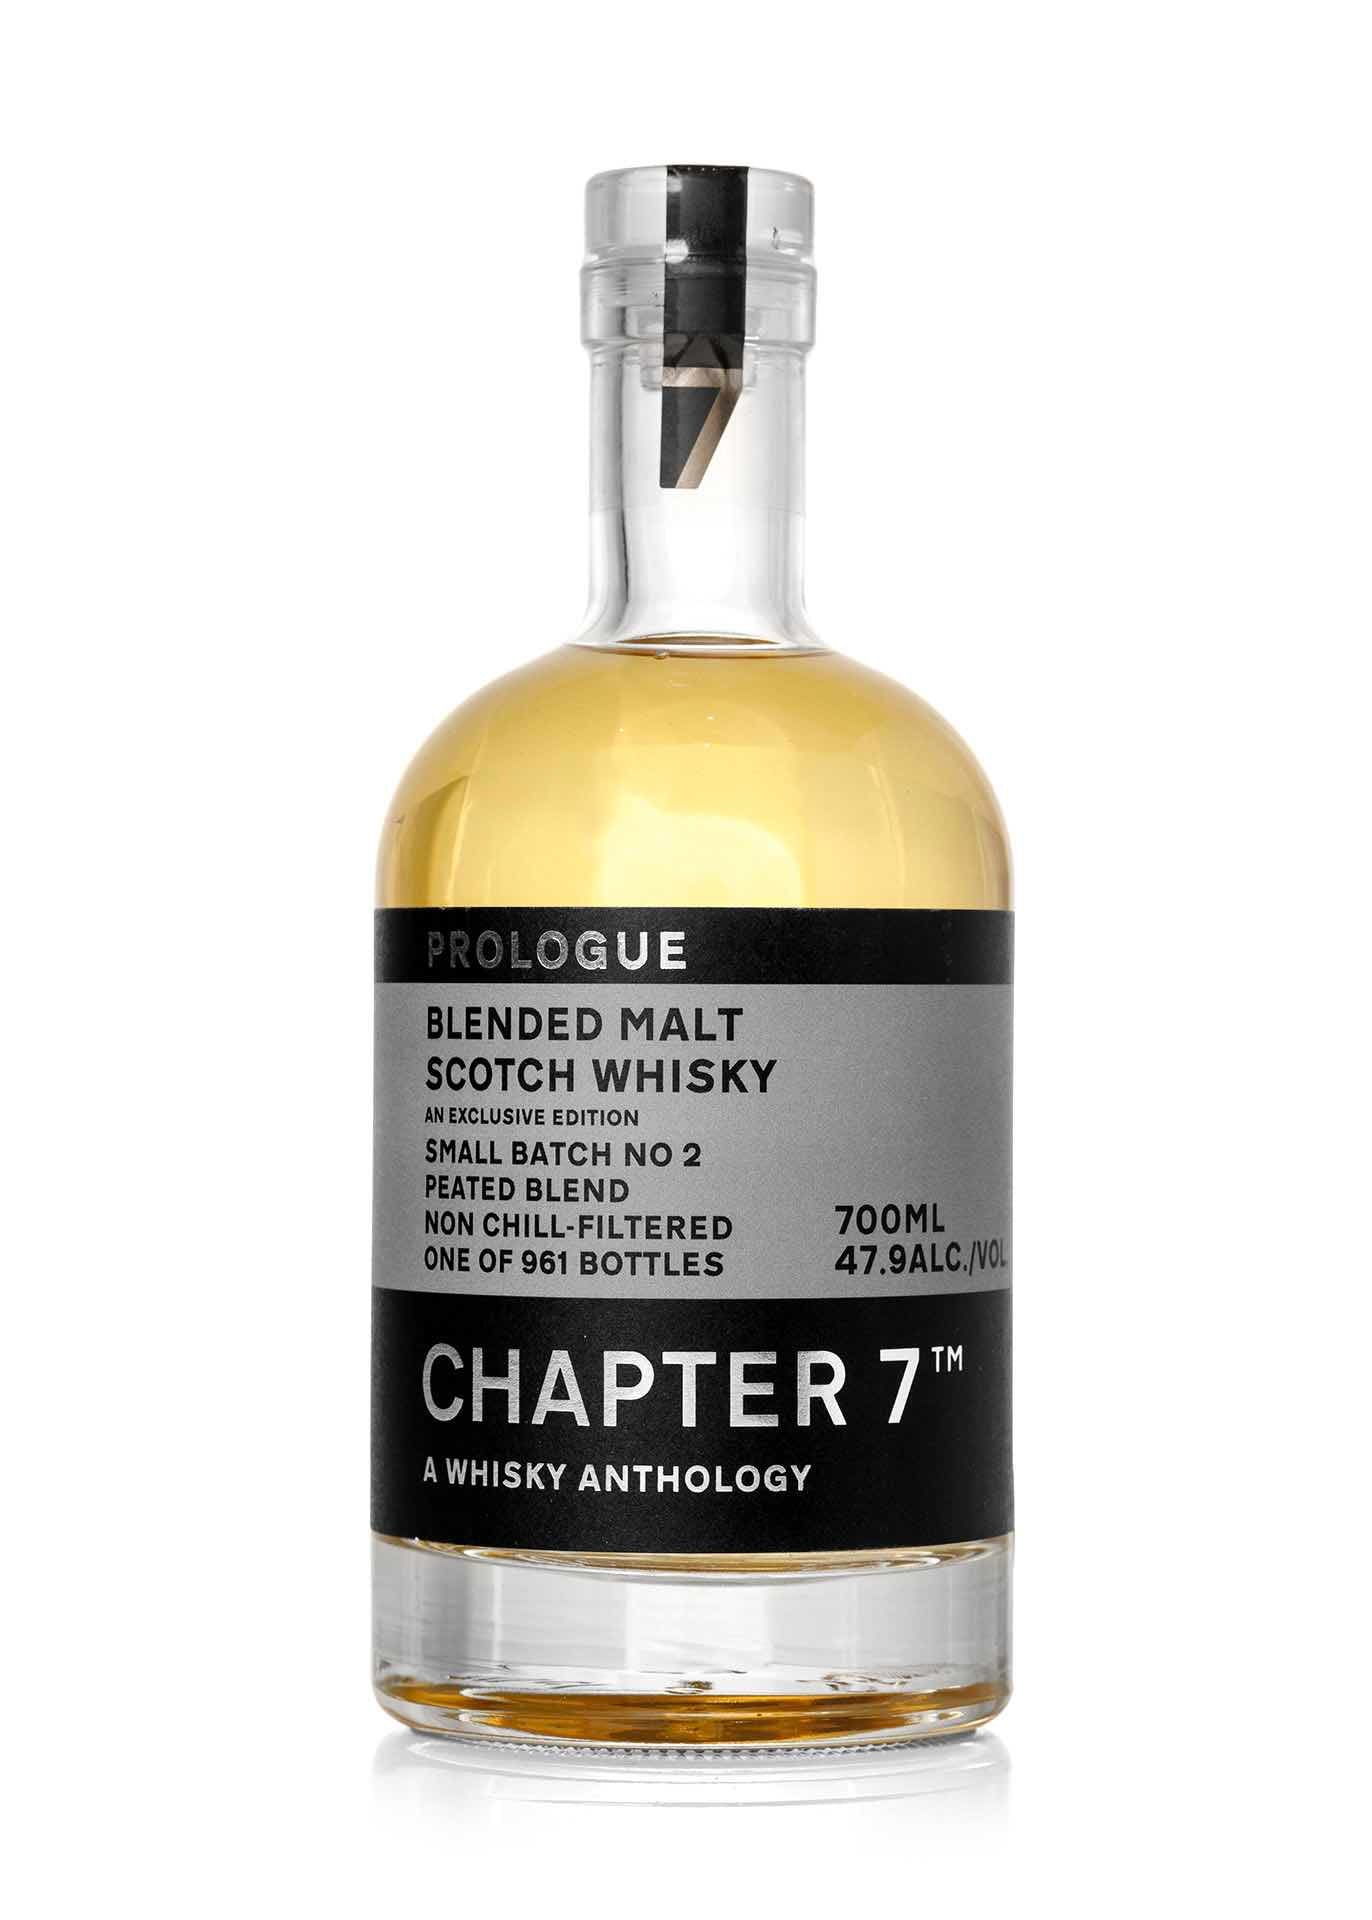 Chapter 7 Whisky: Prologue Peated Blended Malt Whisky